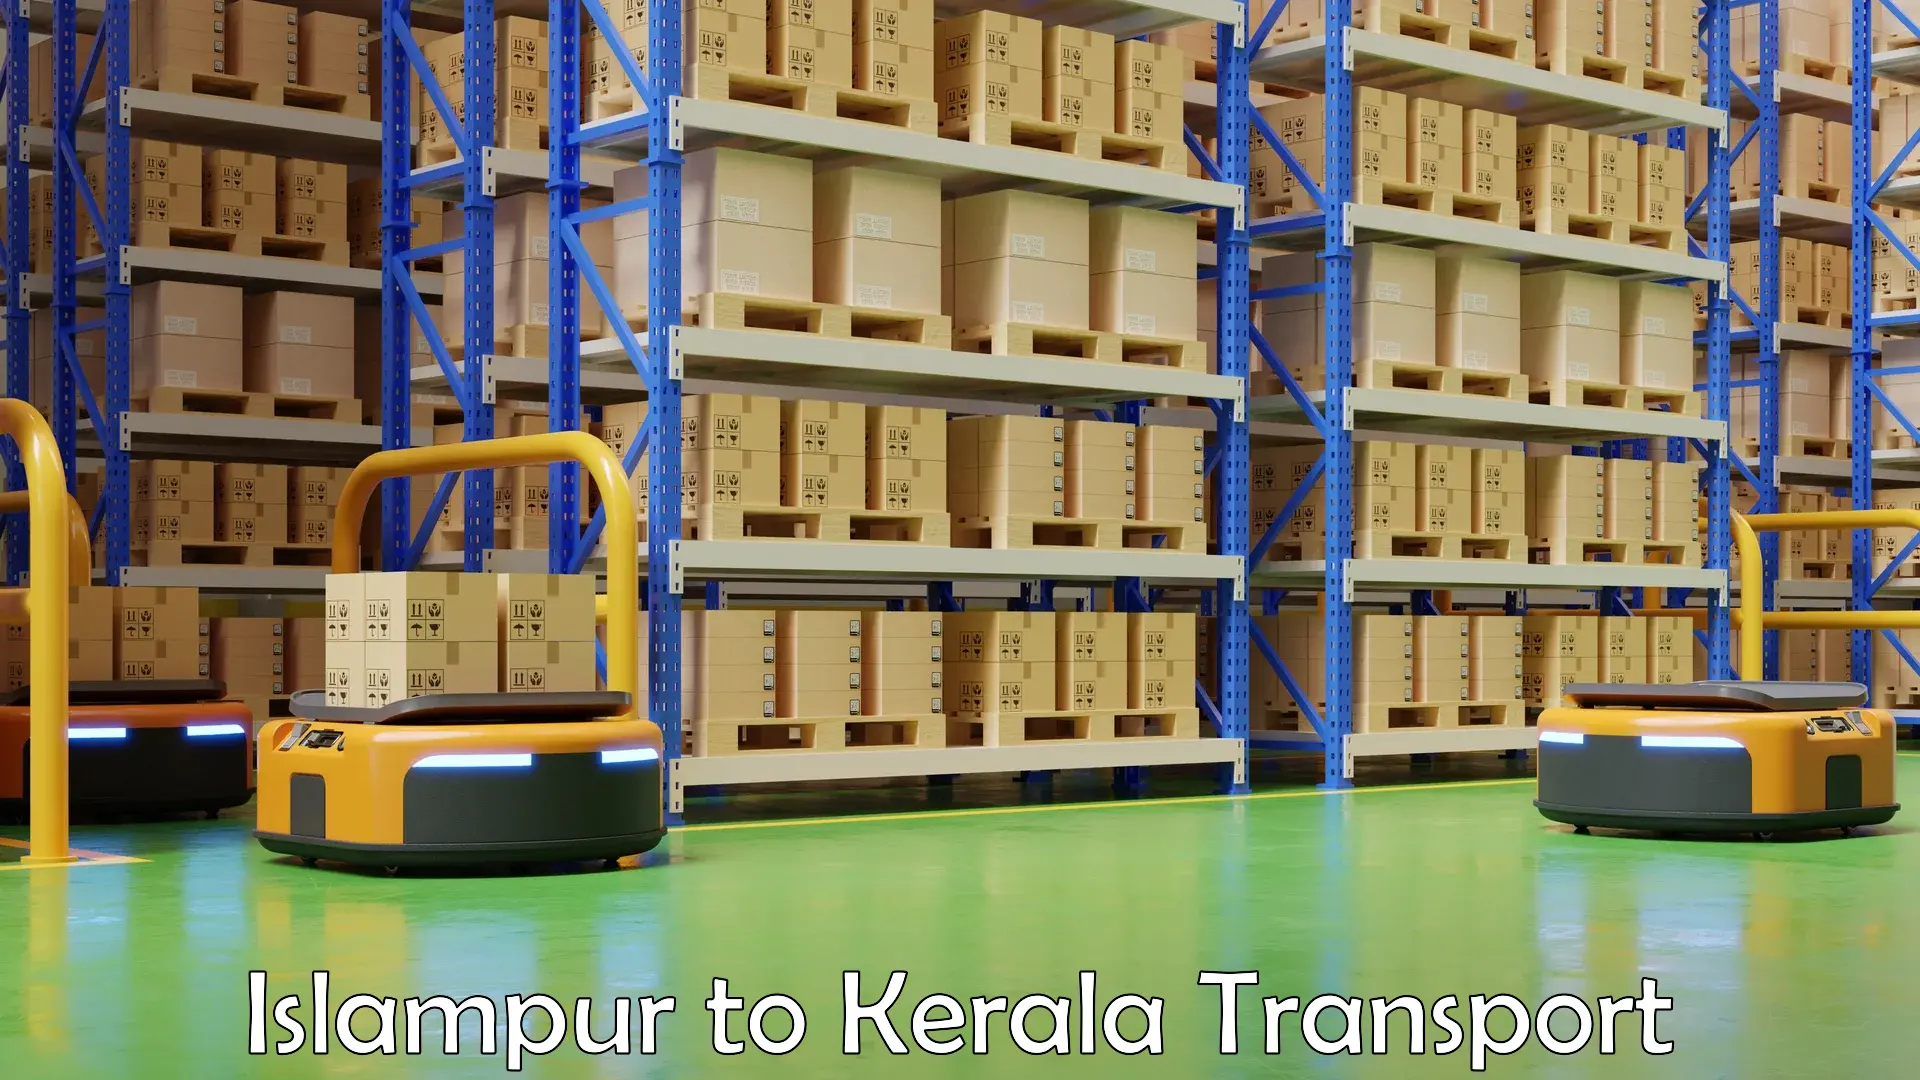 Land transport services in Islampur to Trivandrum